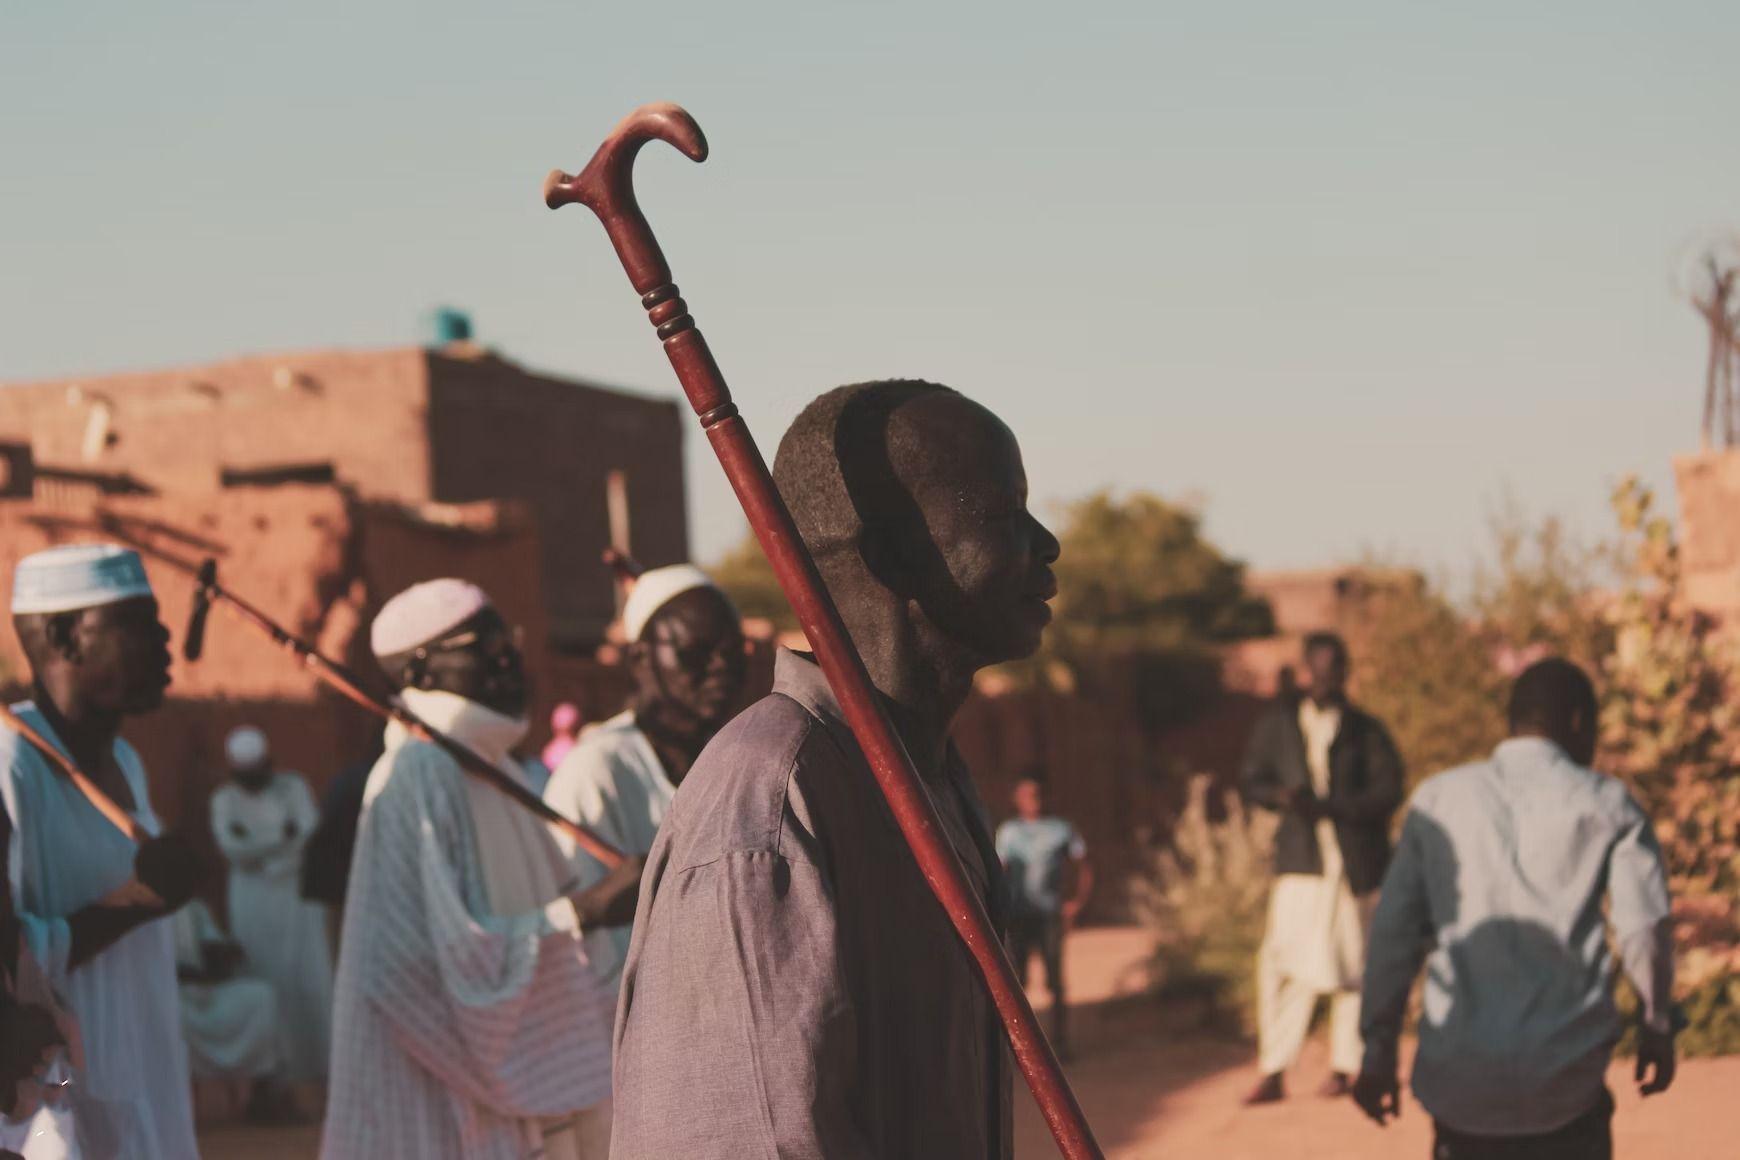 Sudan's Evolving Political Landscape: An In-depth Exploration of the Historical Roots, Current Transitional Governance, and Future Prospects of Democracy in Sudan